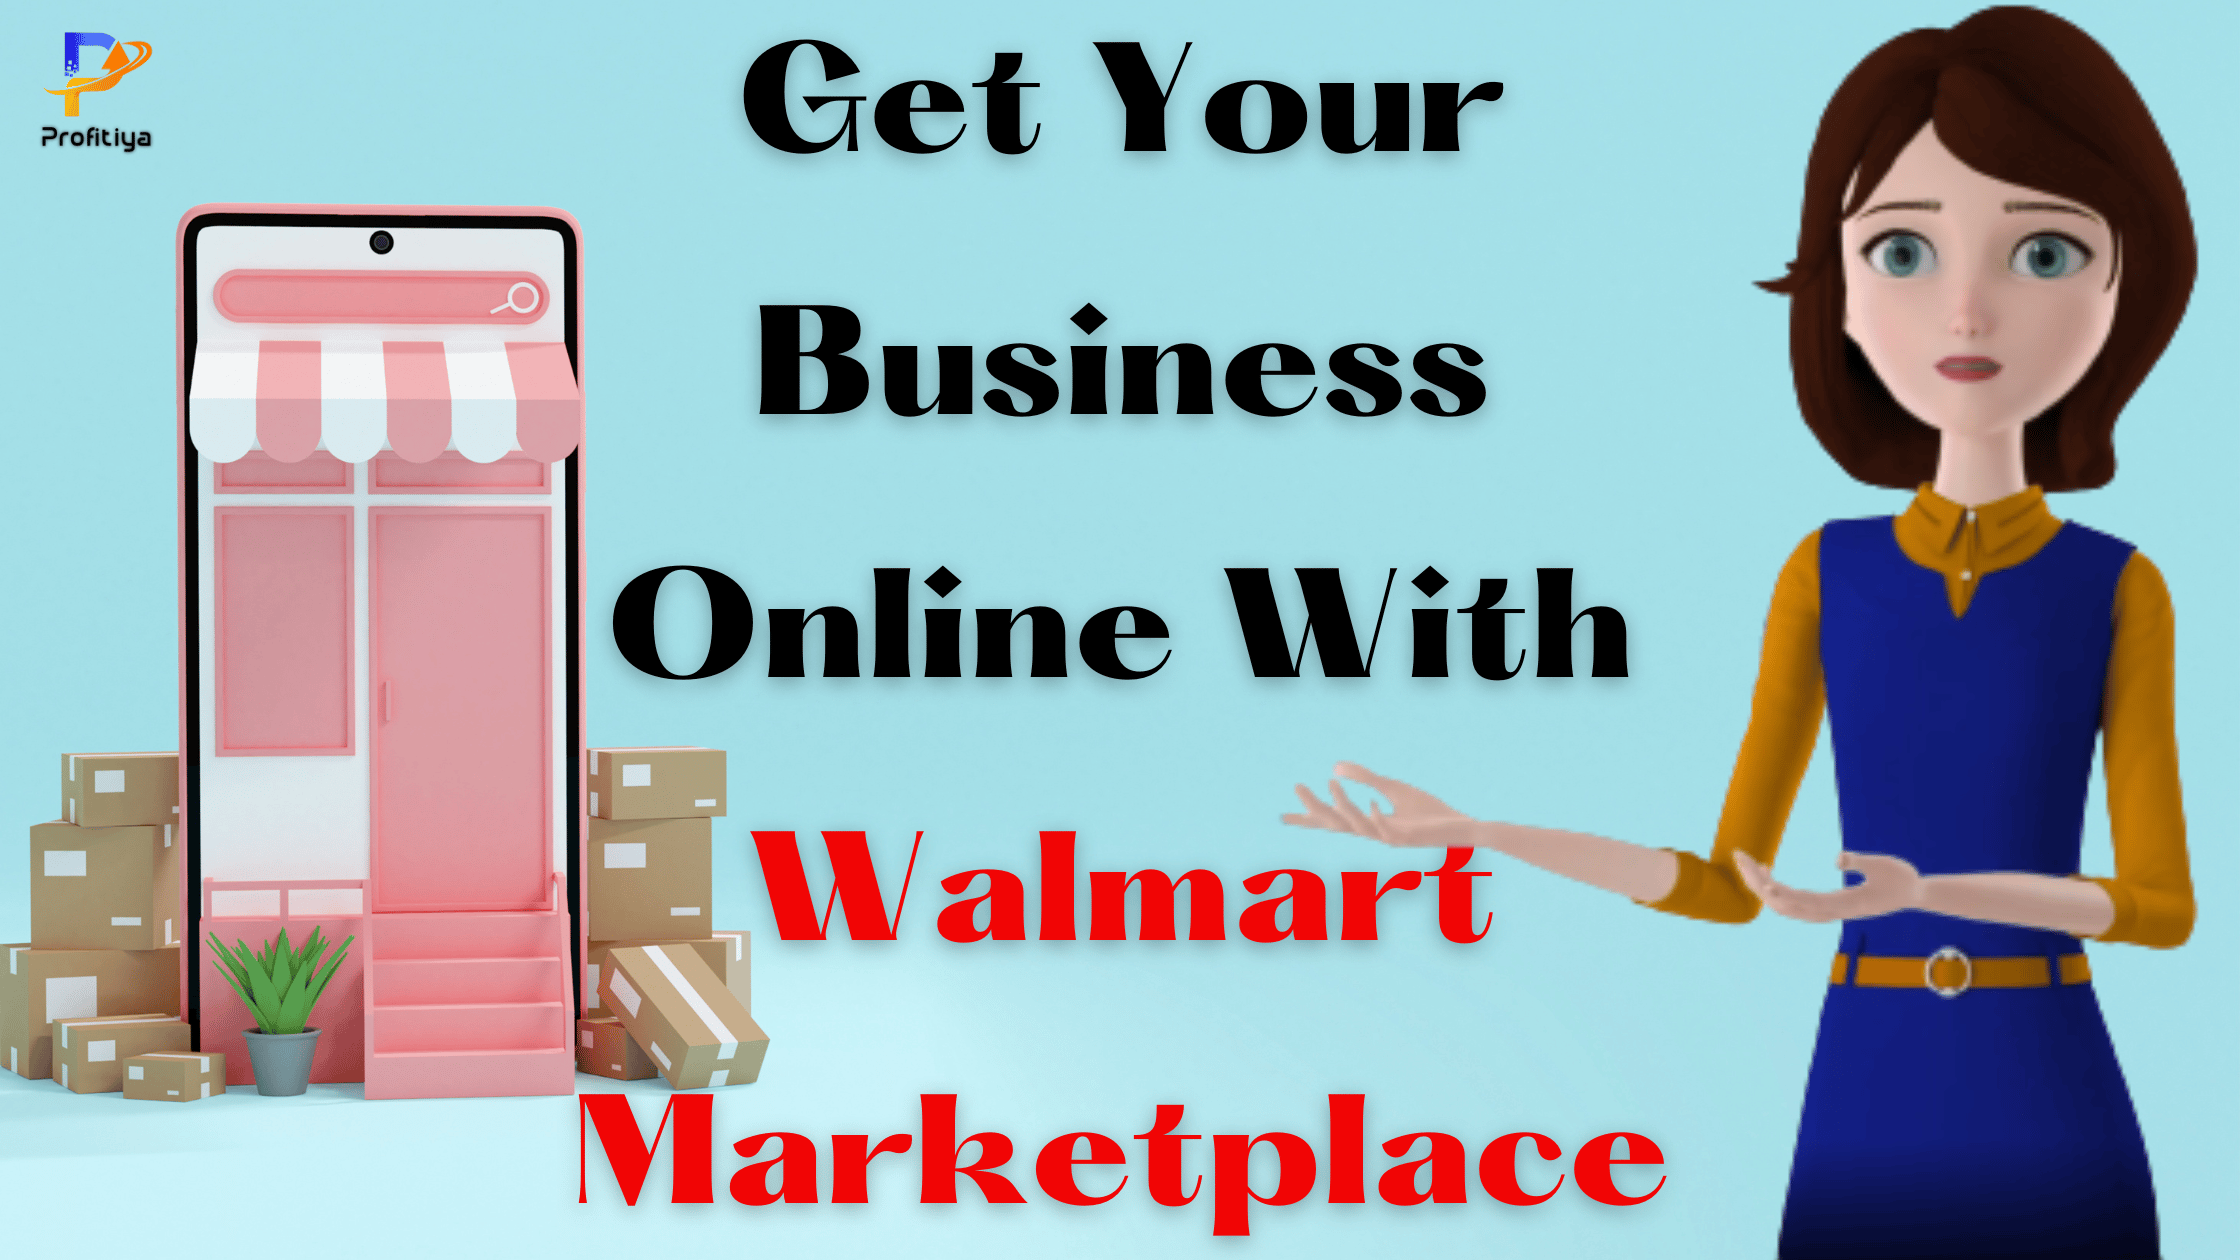 Get Your Business Online With Walmart Marketplace